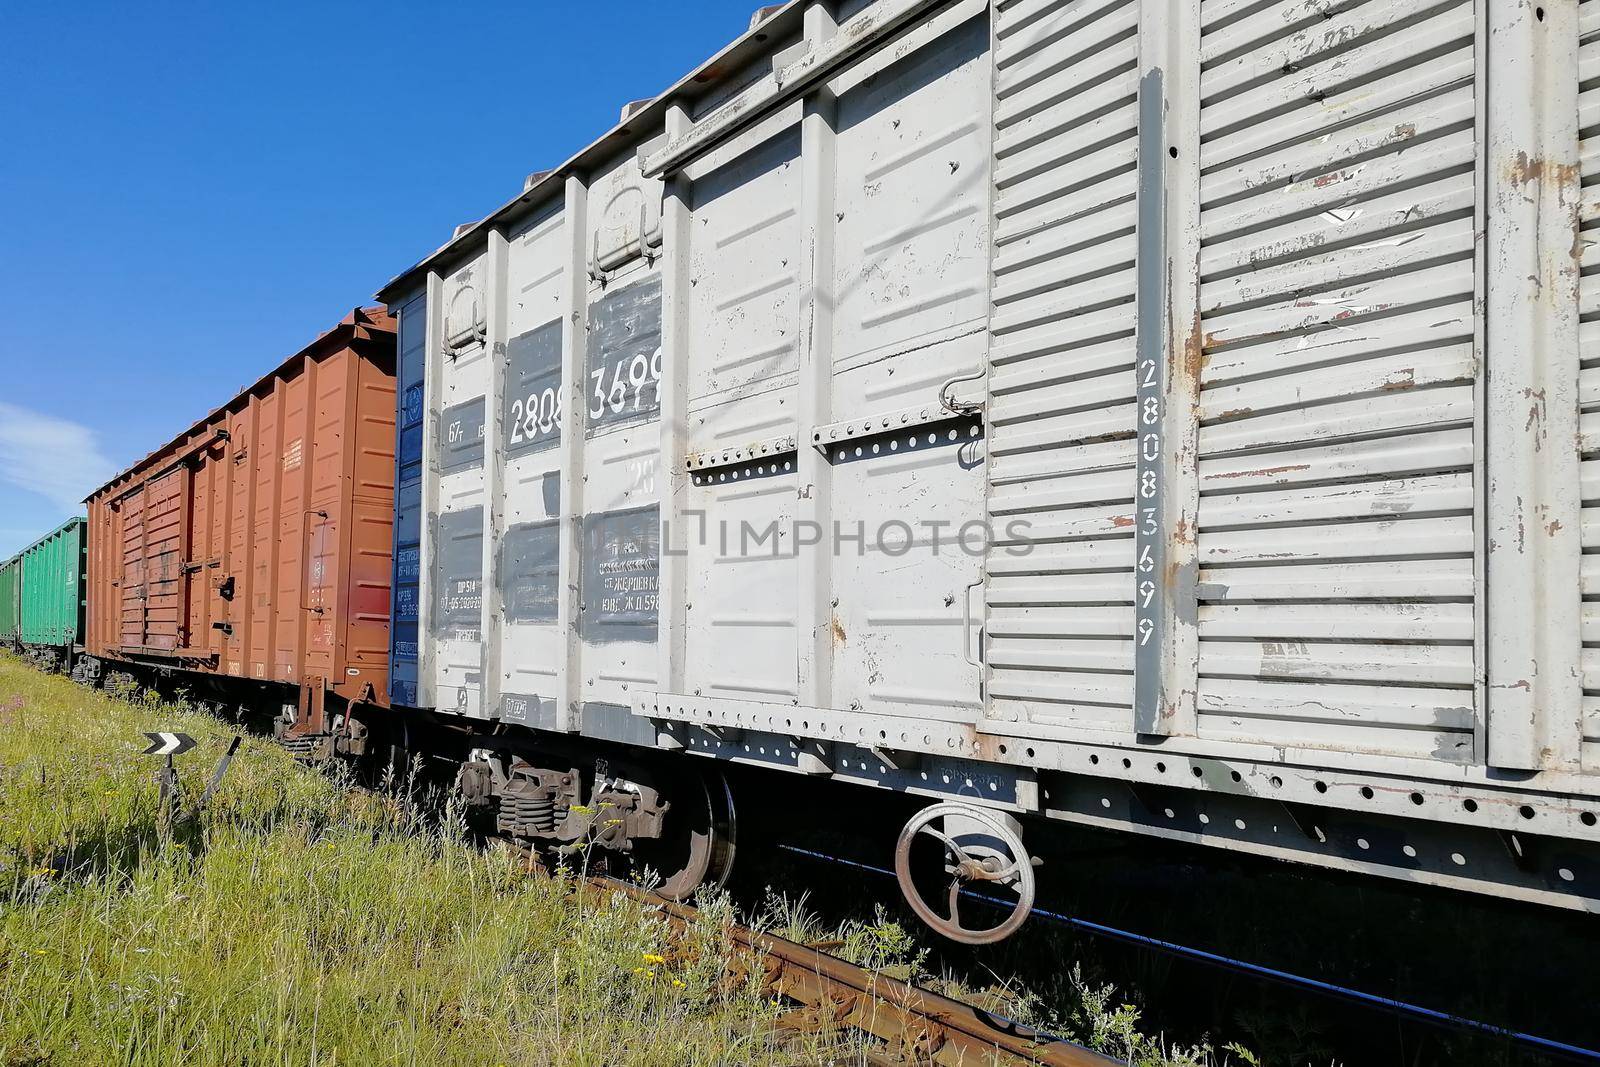 Rail cars on rails. Pictured along. Clear skies and a sunny day. by Essffes